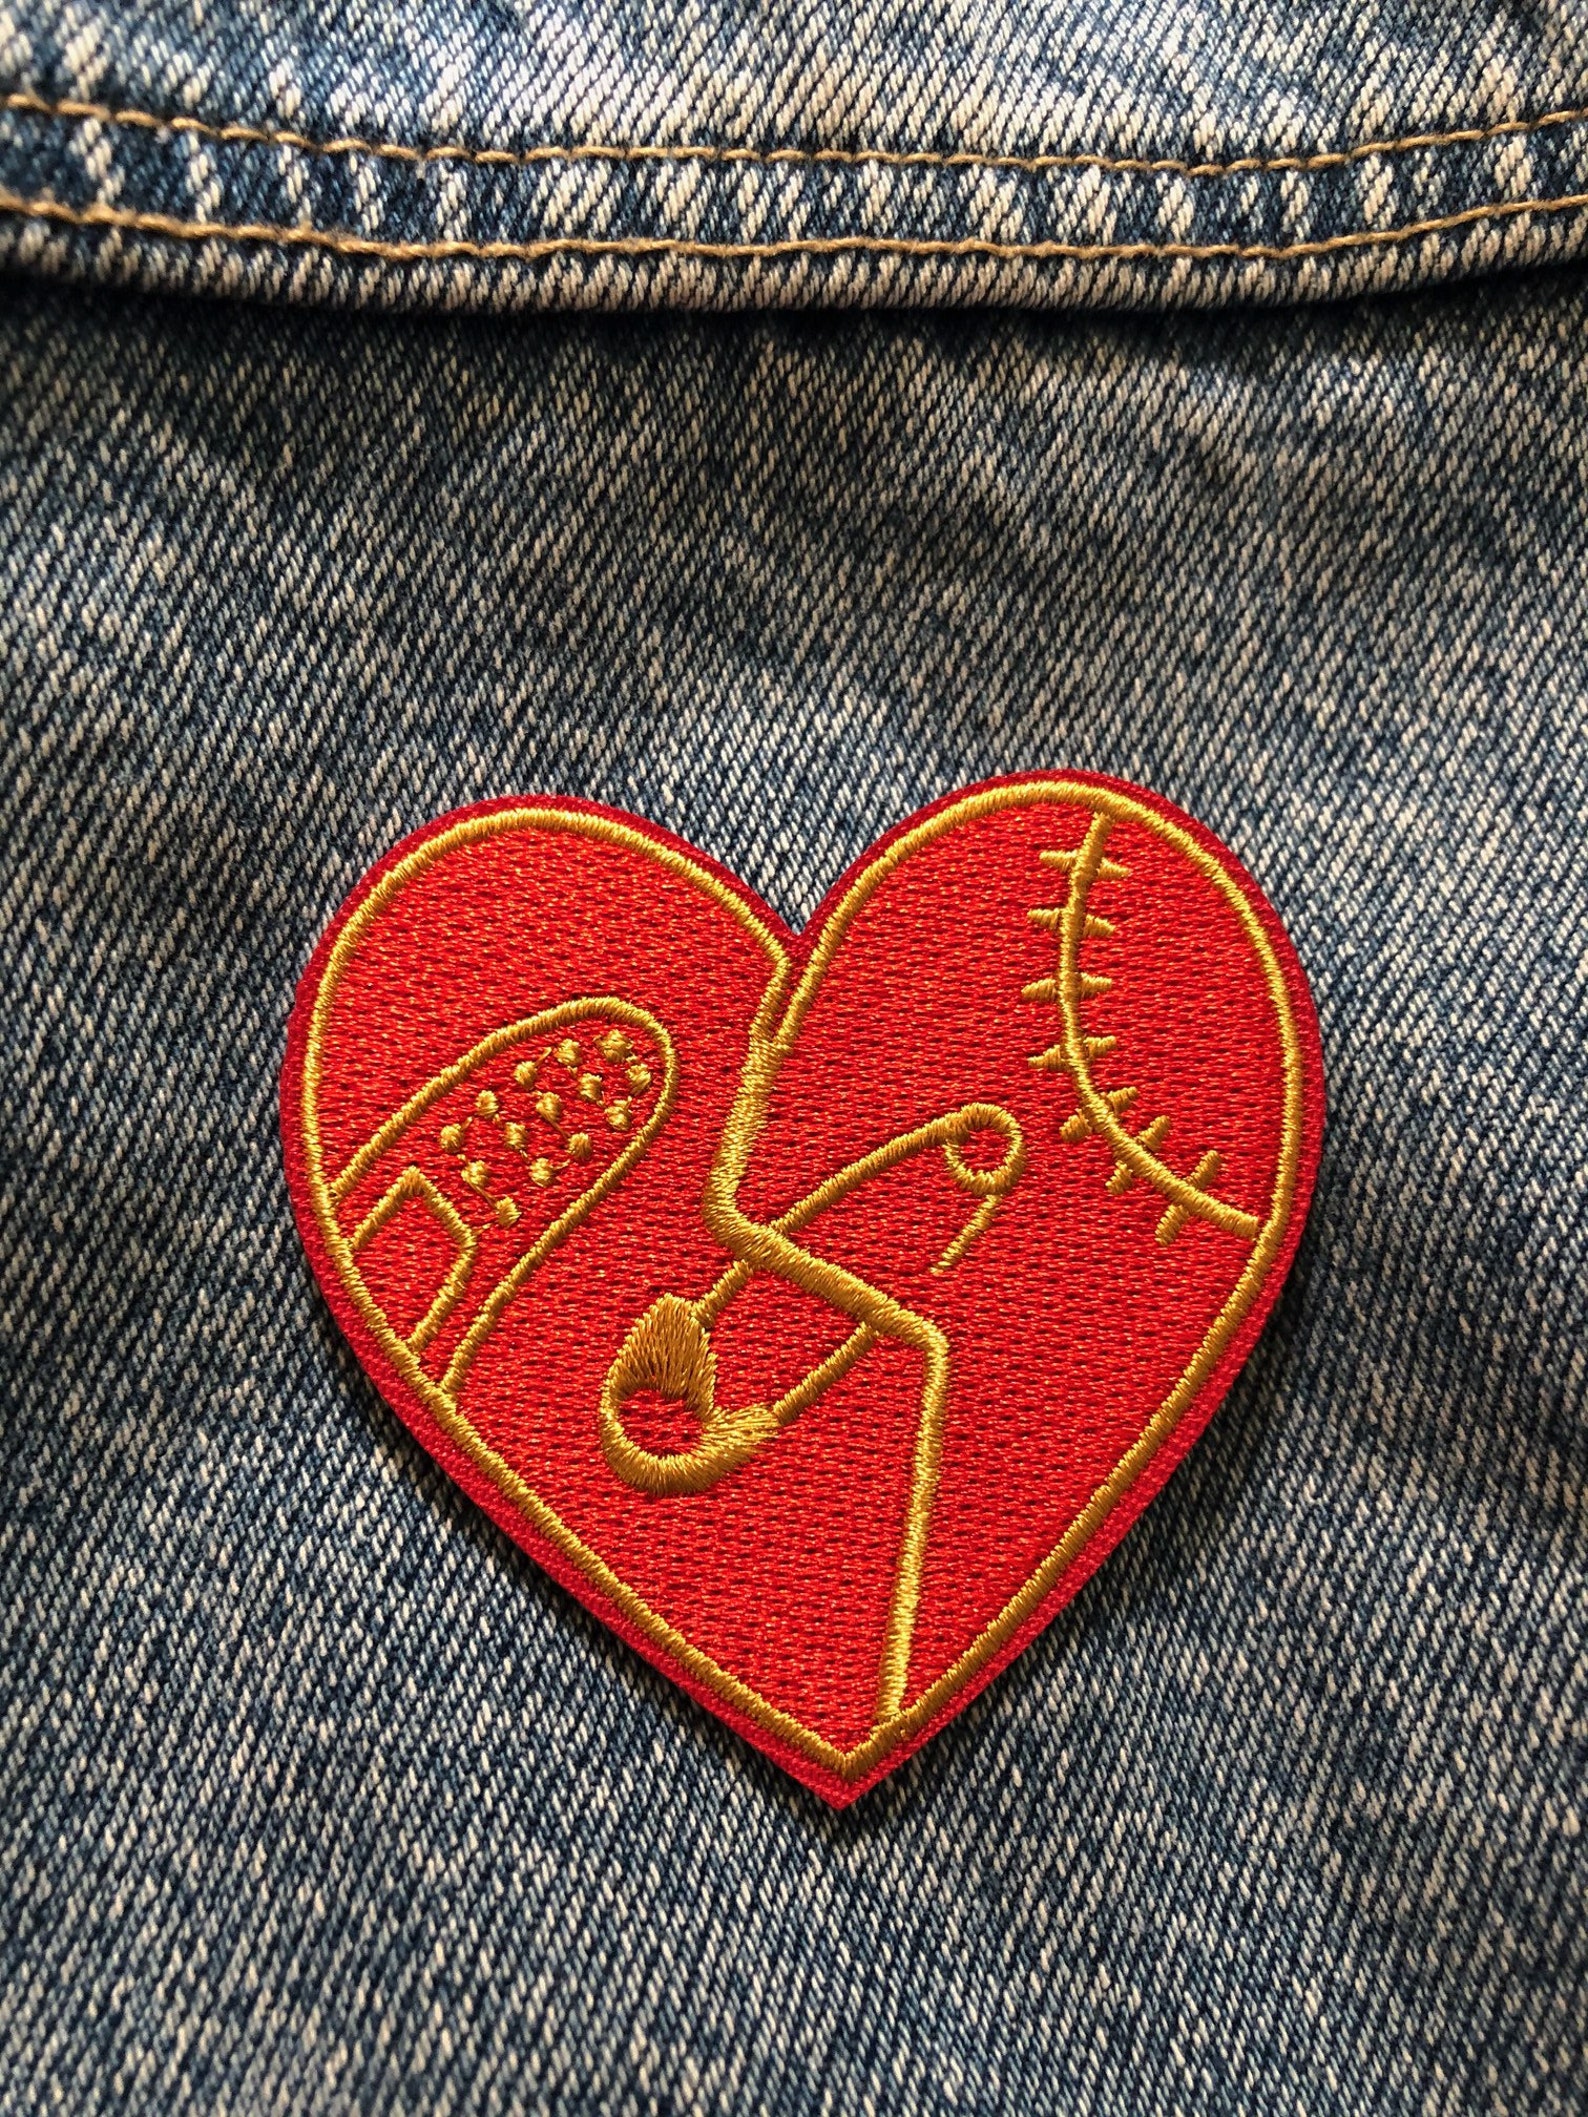 Red Heart Patch Iron On Patch Broken Heart Patch-Sew On | Etsy